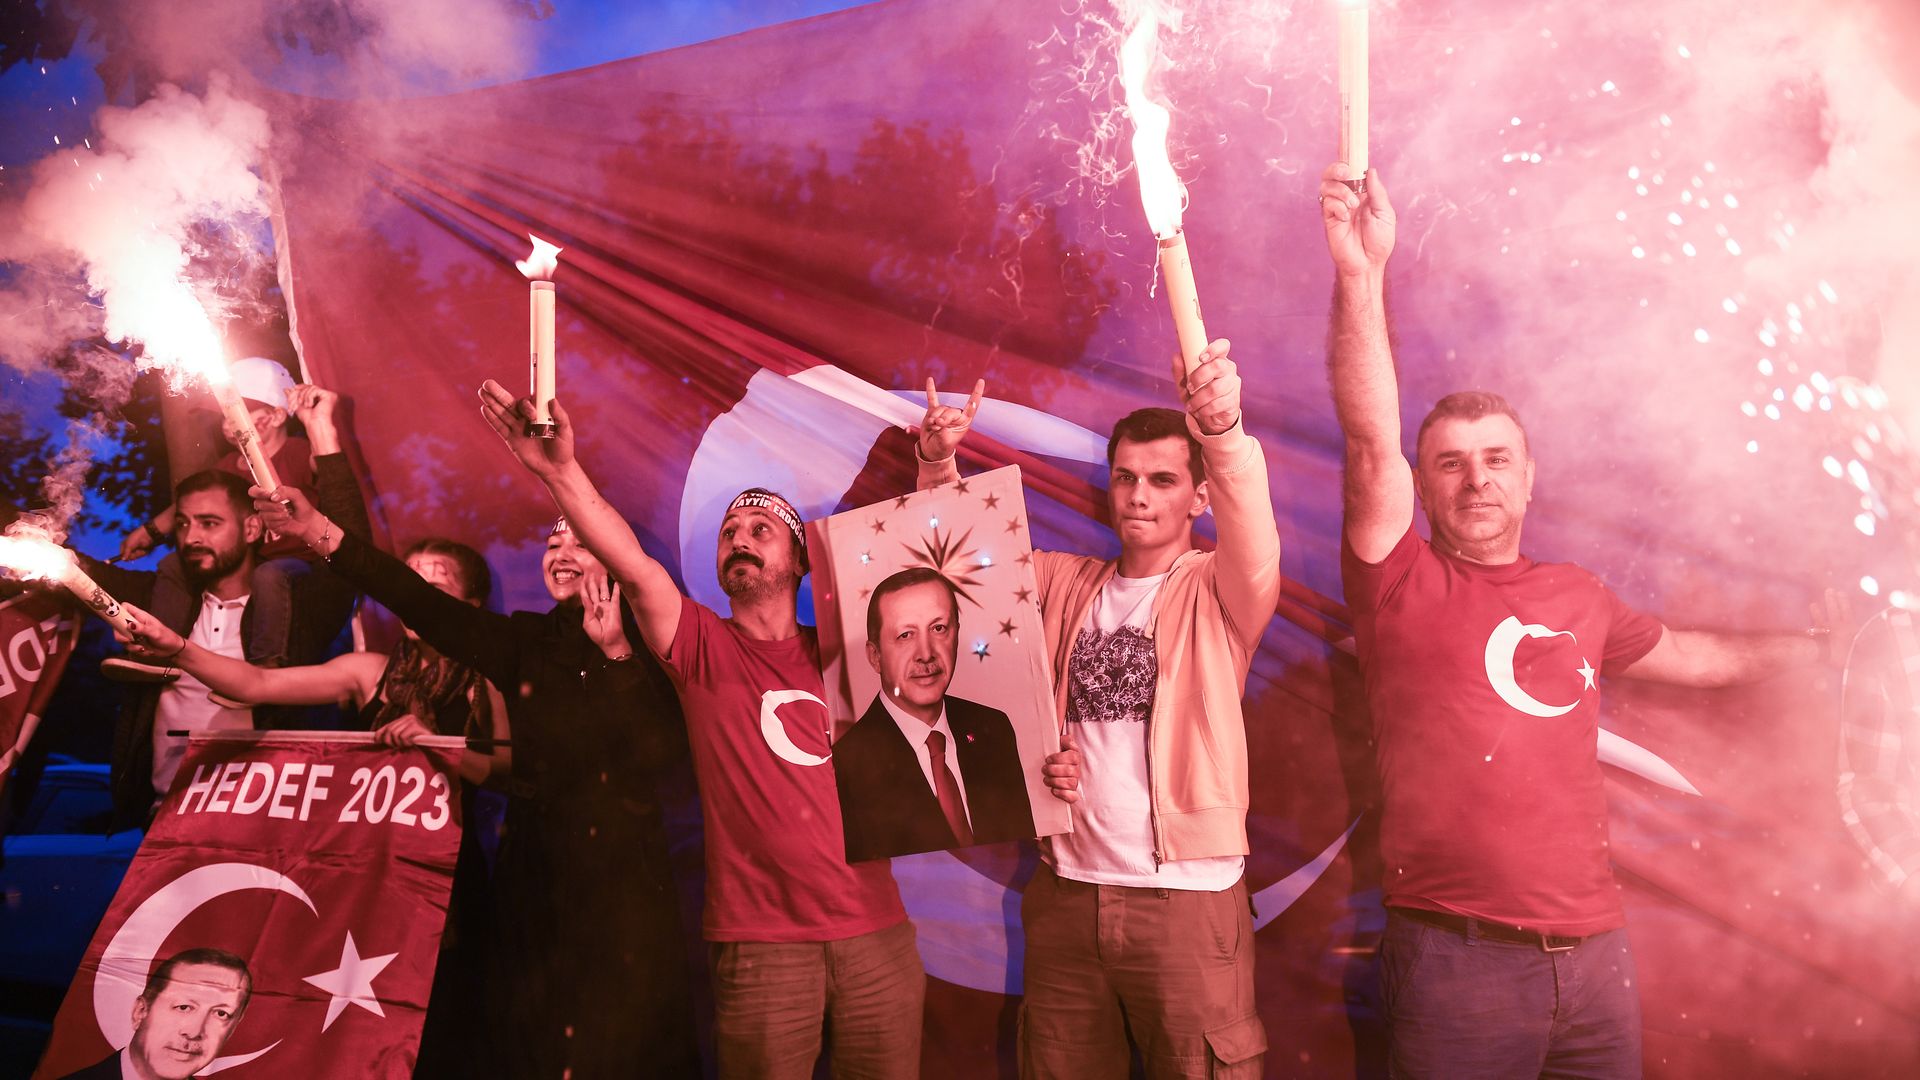 Erdogan's supporters celebrate outside the AK party headquarters on June 24, 2018 in Istanbul, Turkey.